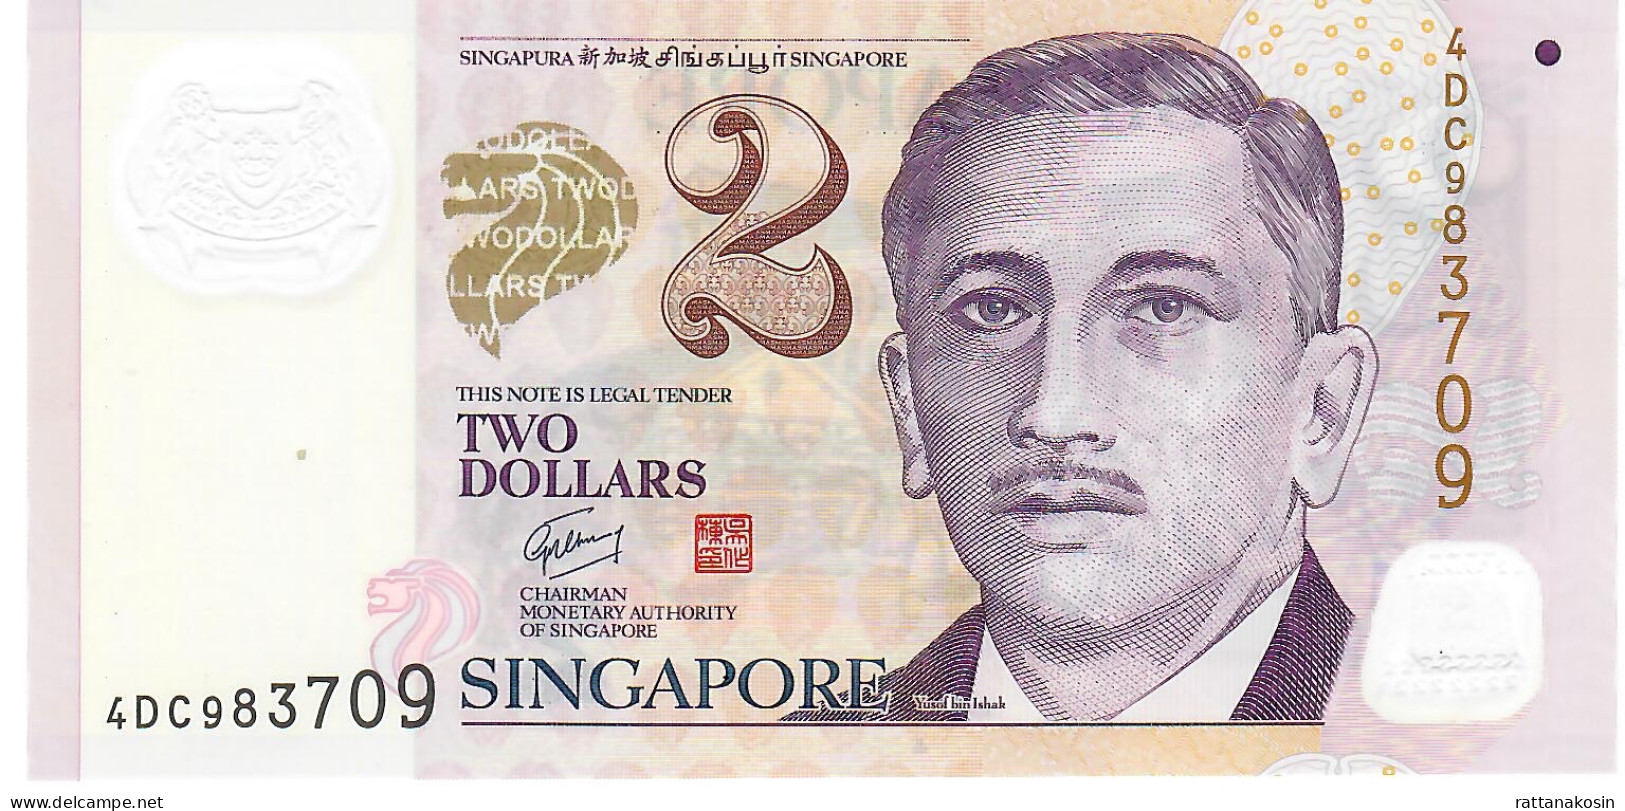 SINGAPORE P46d 2 DOLLARS ND Issued 2011  #4DC  ONE TRIANGLE       AU-UNC. - Singapore